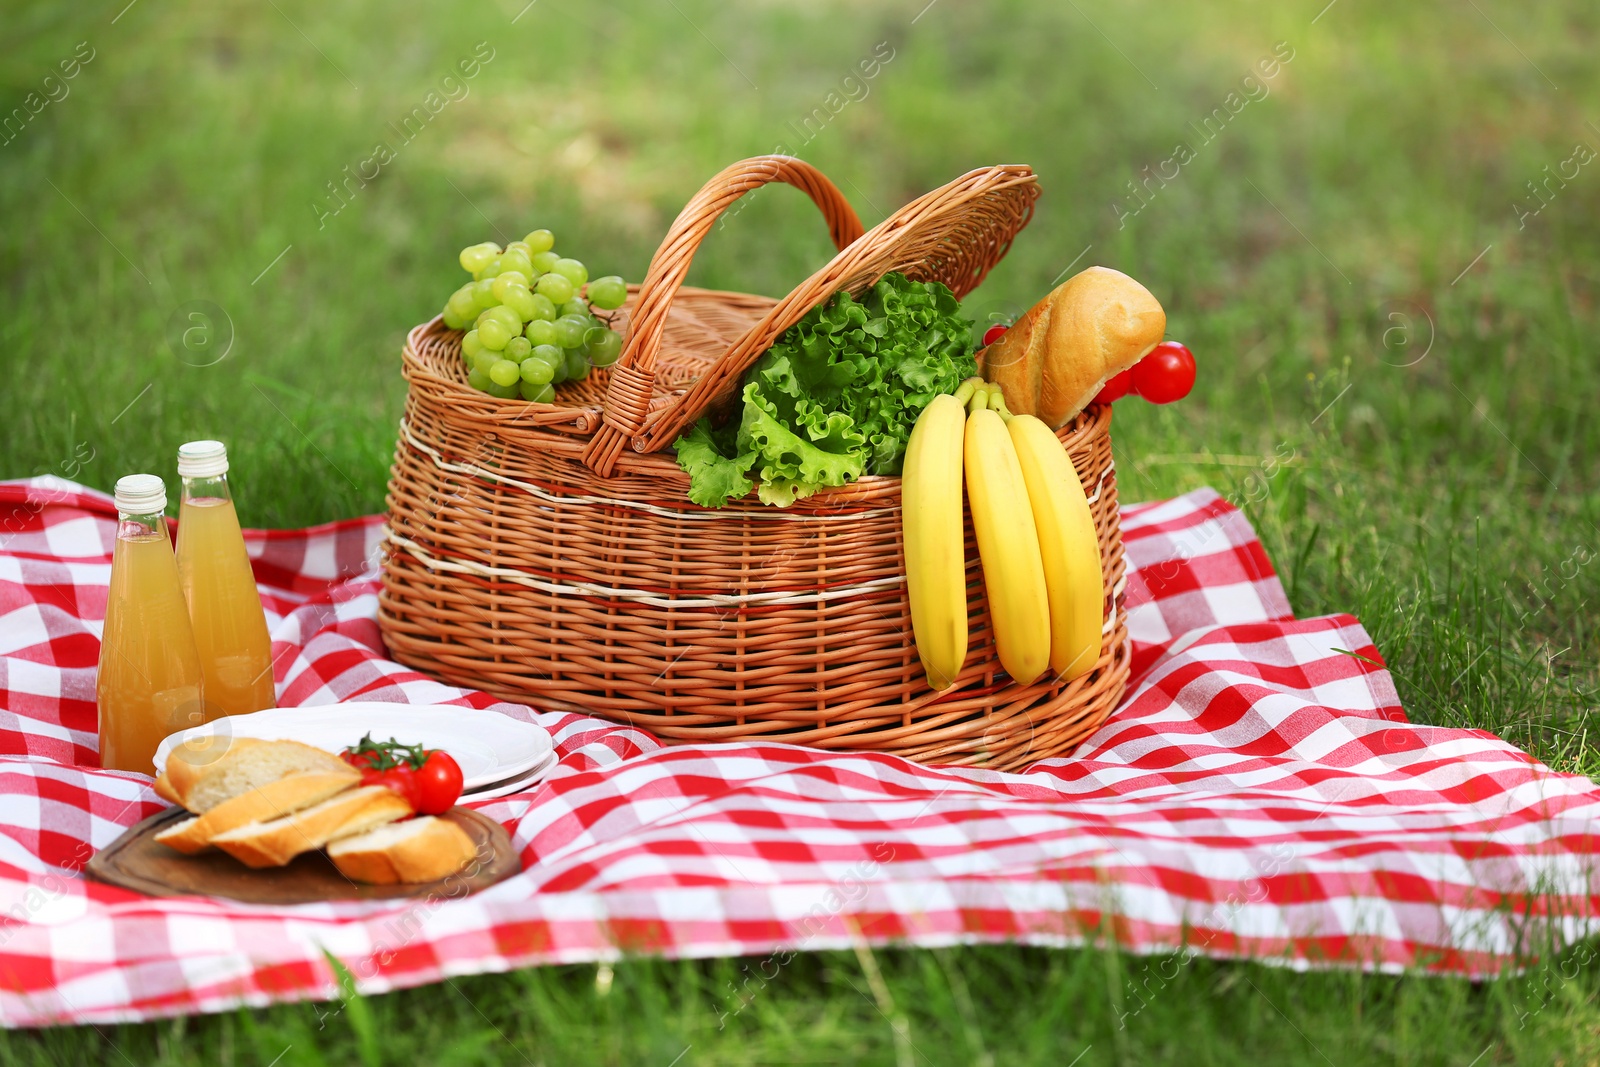 Photo of Wicker basket with food and juice on blanket in park. Summer picnic